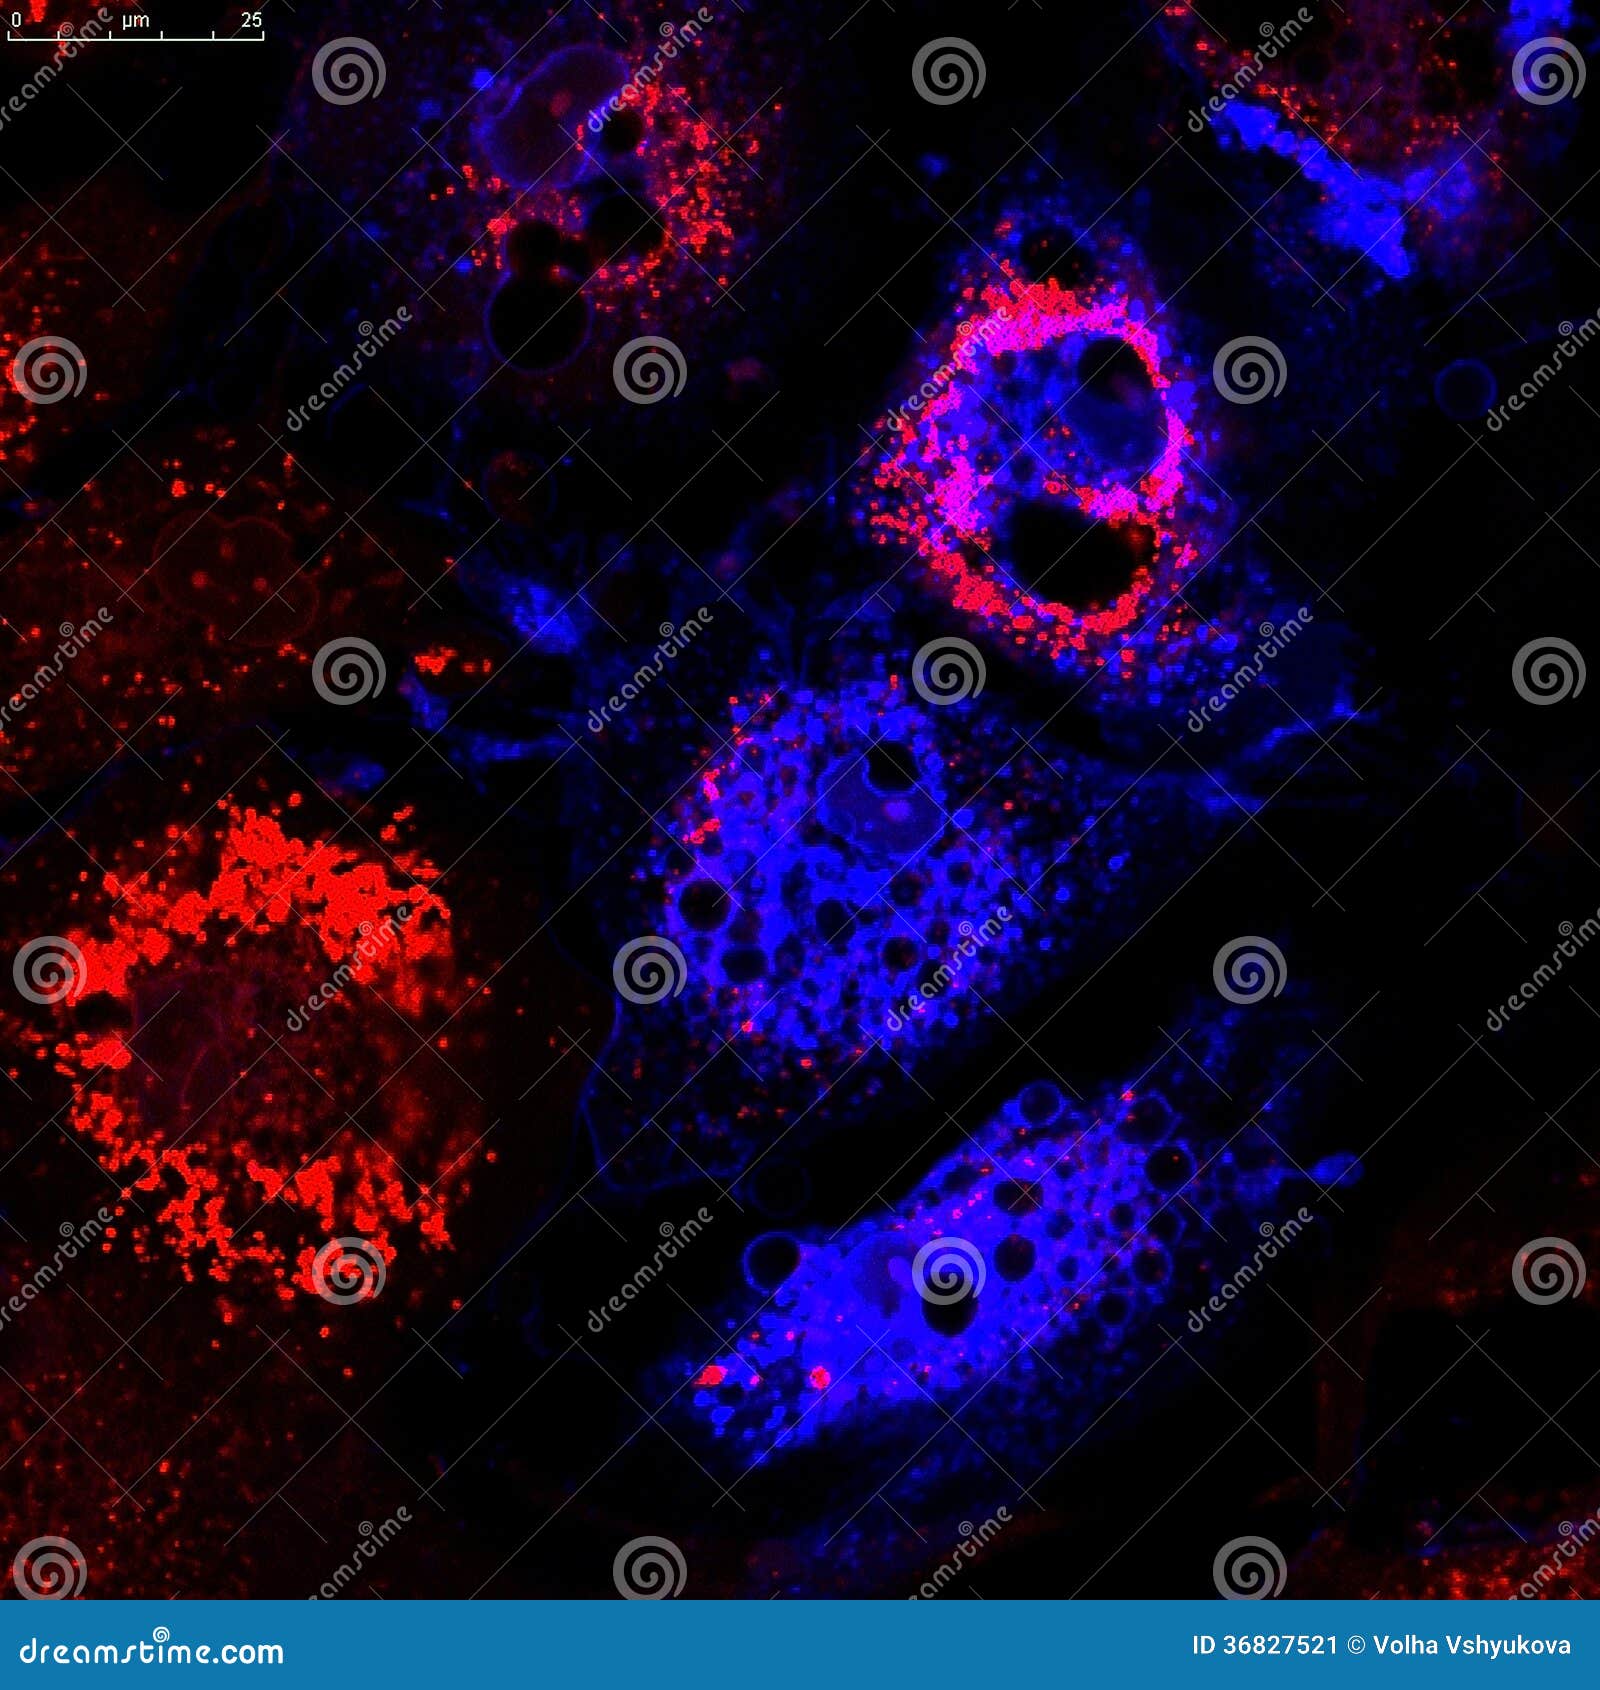 fibroblasts (skin cells) labeled with fluorescent dyes